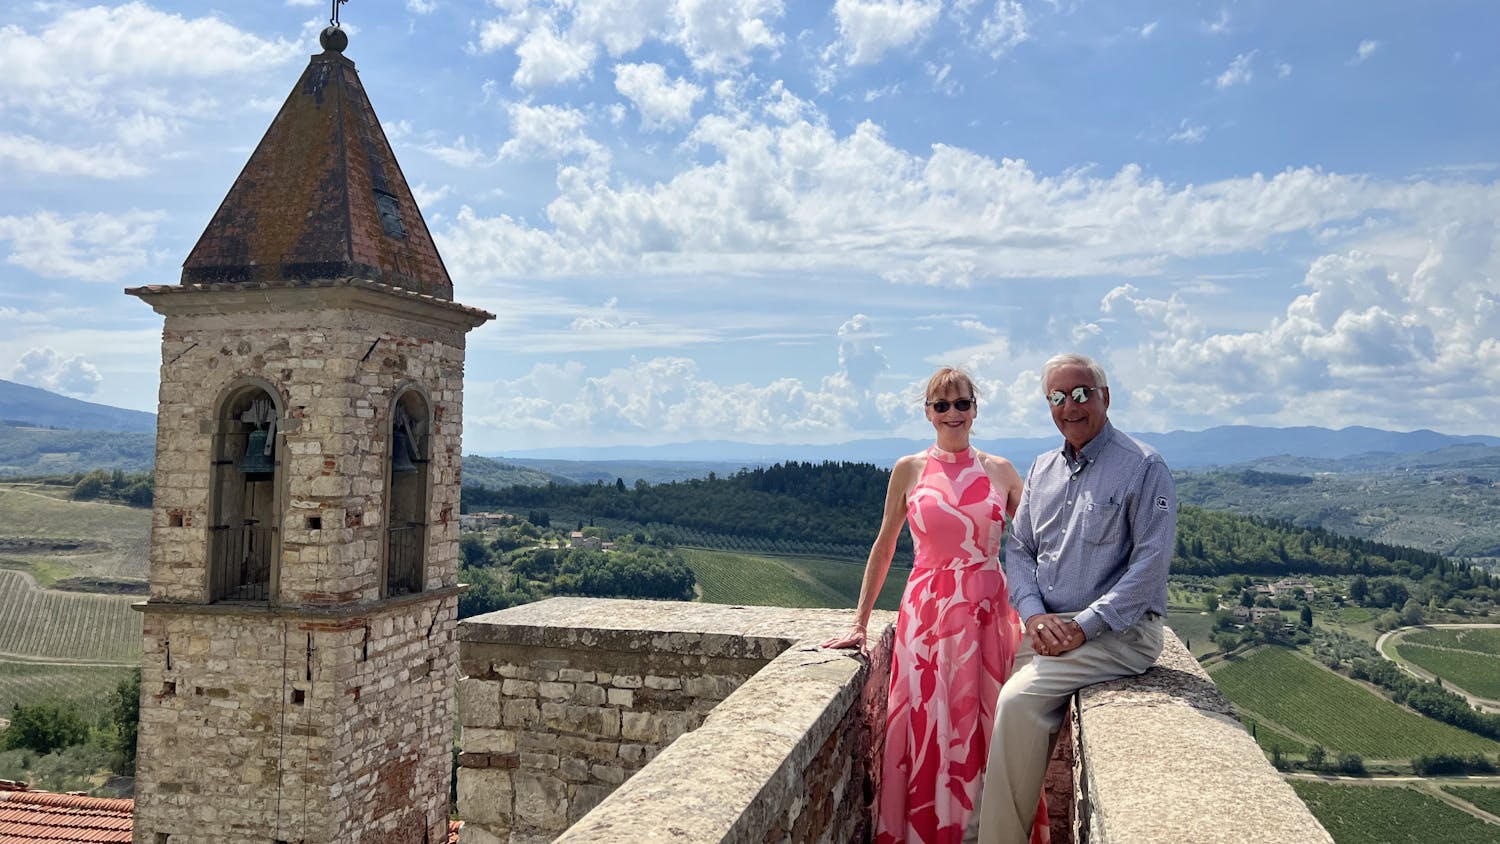 Harris and Patricia Pastides pose for a photo during a trip to Tuscany, Italy.&nbsp;